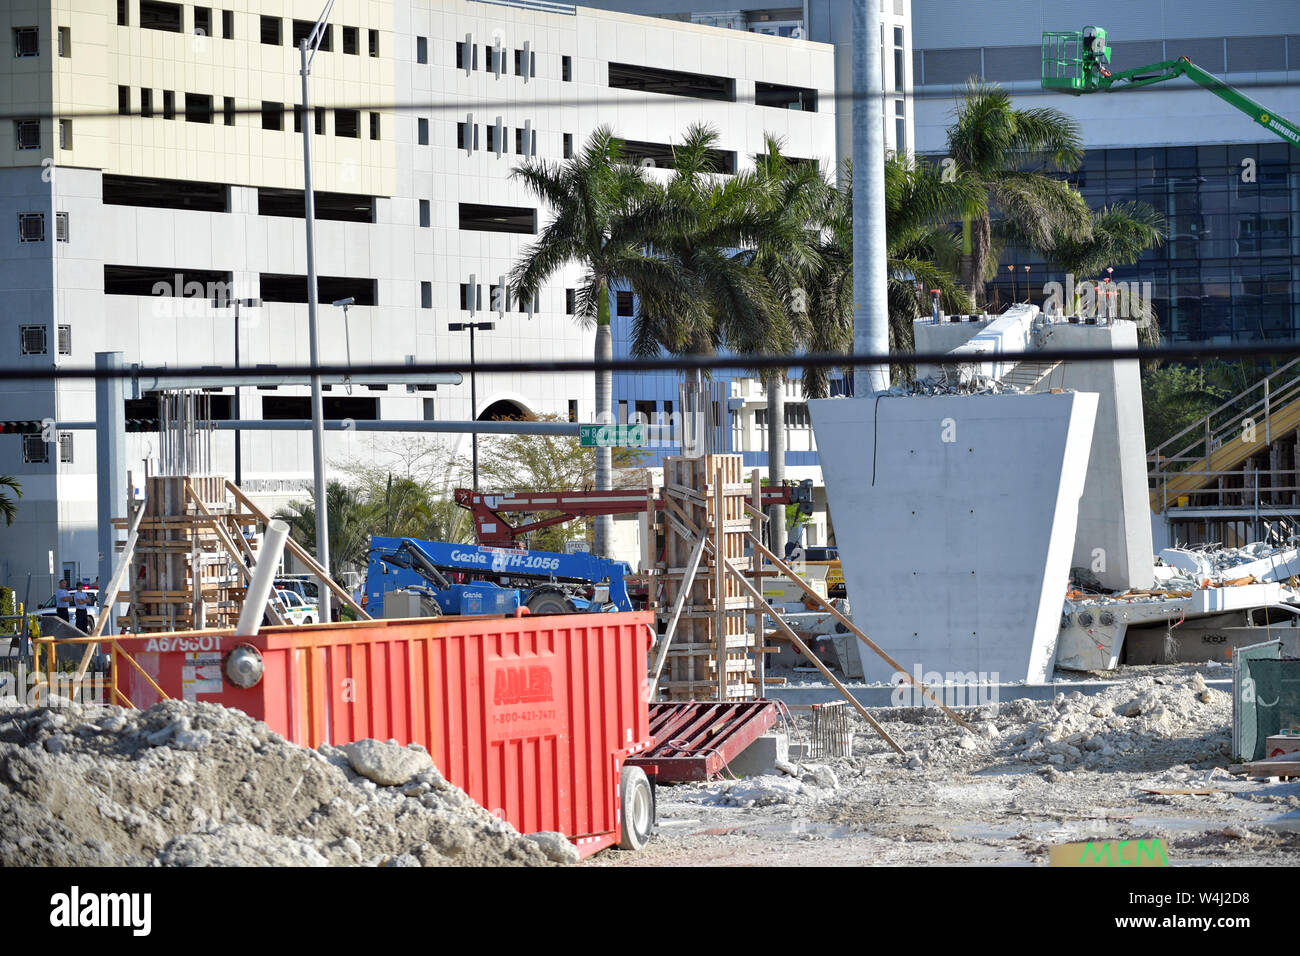 MIAMI, FL - MARCH 17: Crack on Florida Bridge Was Discussed in Meeting Hours Before Collapse - Scene where a pedestrian bridge collapsed a few days after it was built over southwest 8th street allowing people to bypass the busy street to reach Florida International University on March 17, 2018 in Miami, Florida. Reports indicate that there are at least 6 fatalities as a result of the collapse, which crushed at least five cars. Fireman remove rubble delicately by hand in respect for the deceased and their families  People:  Atmosphere Stock Photo